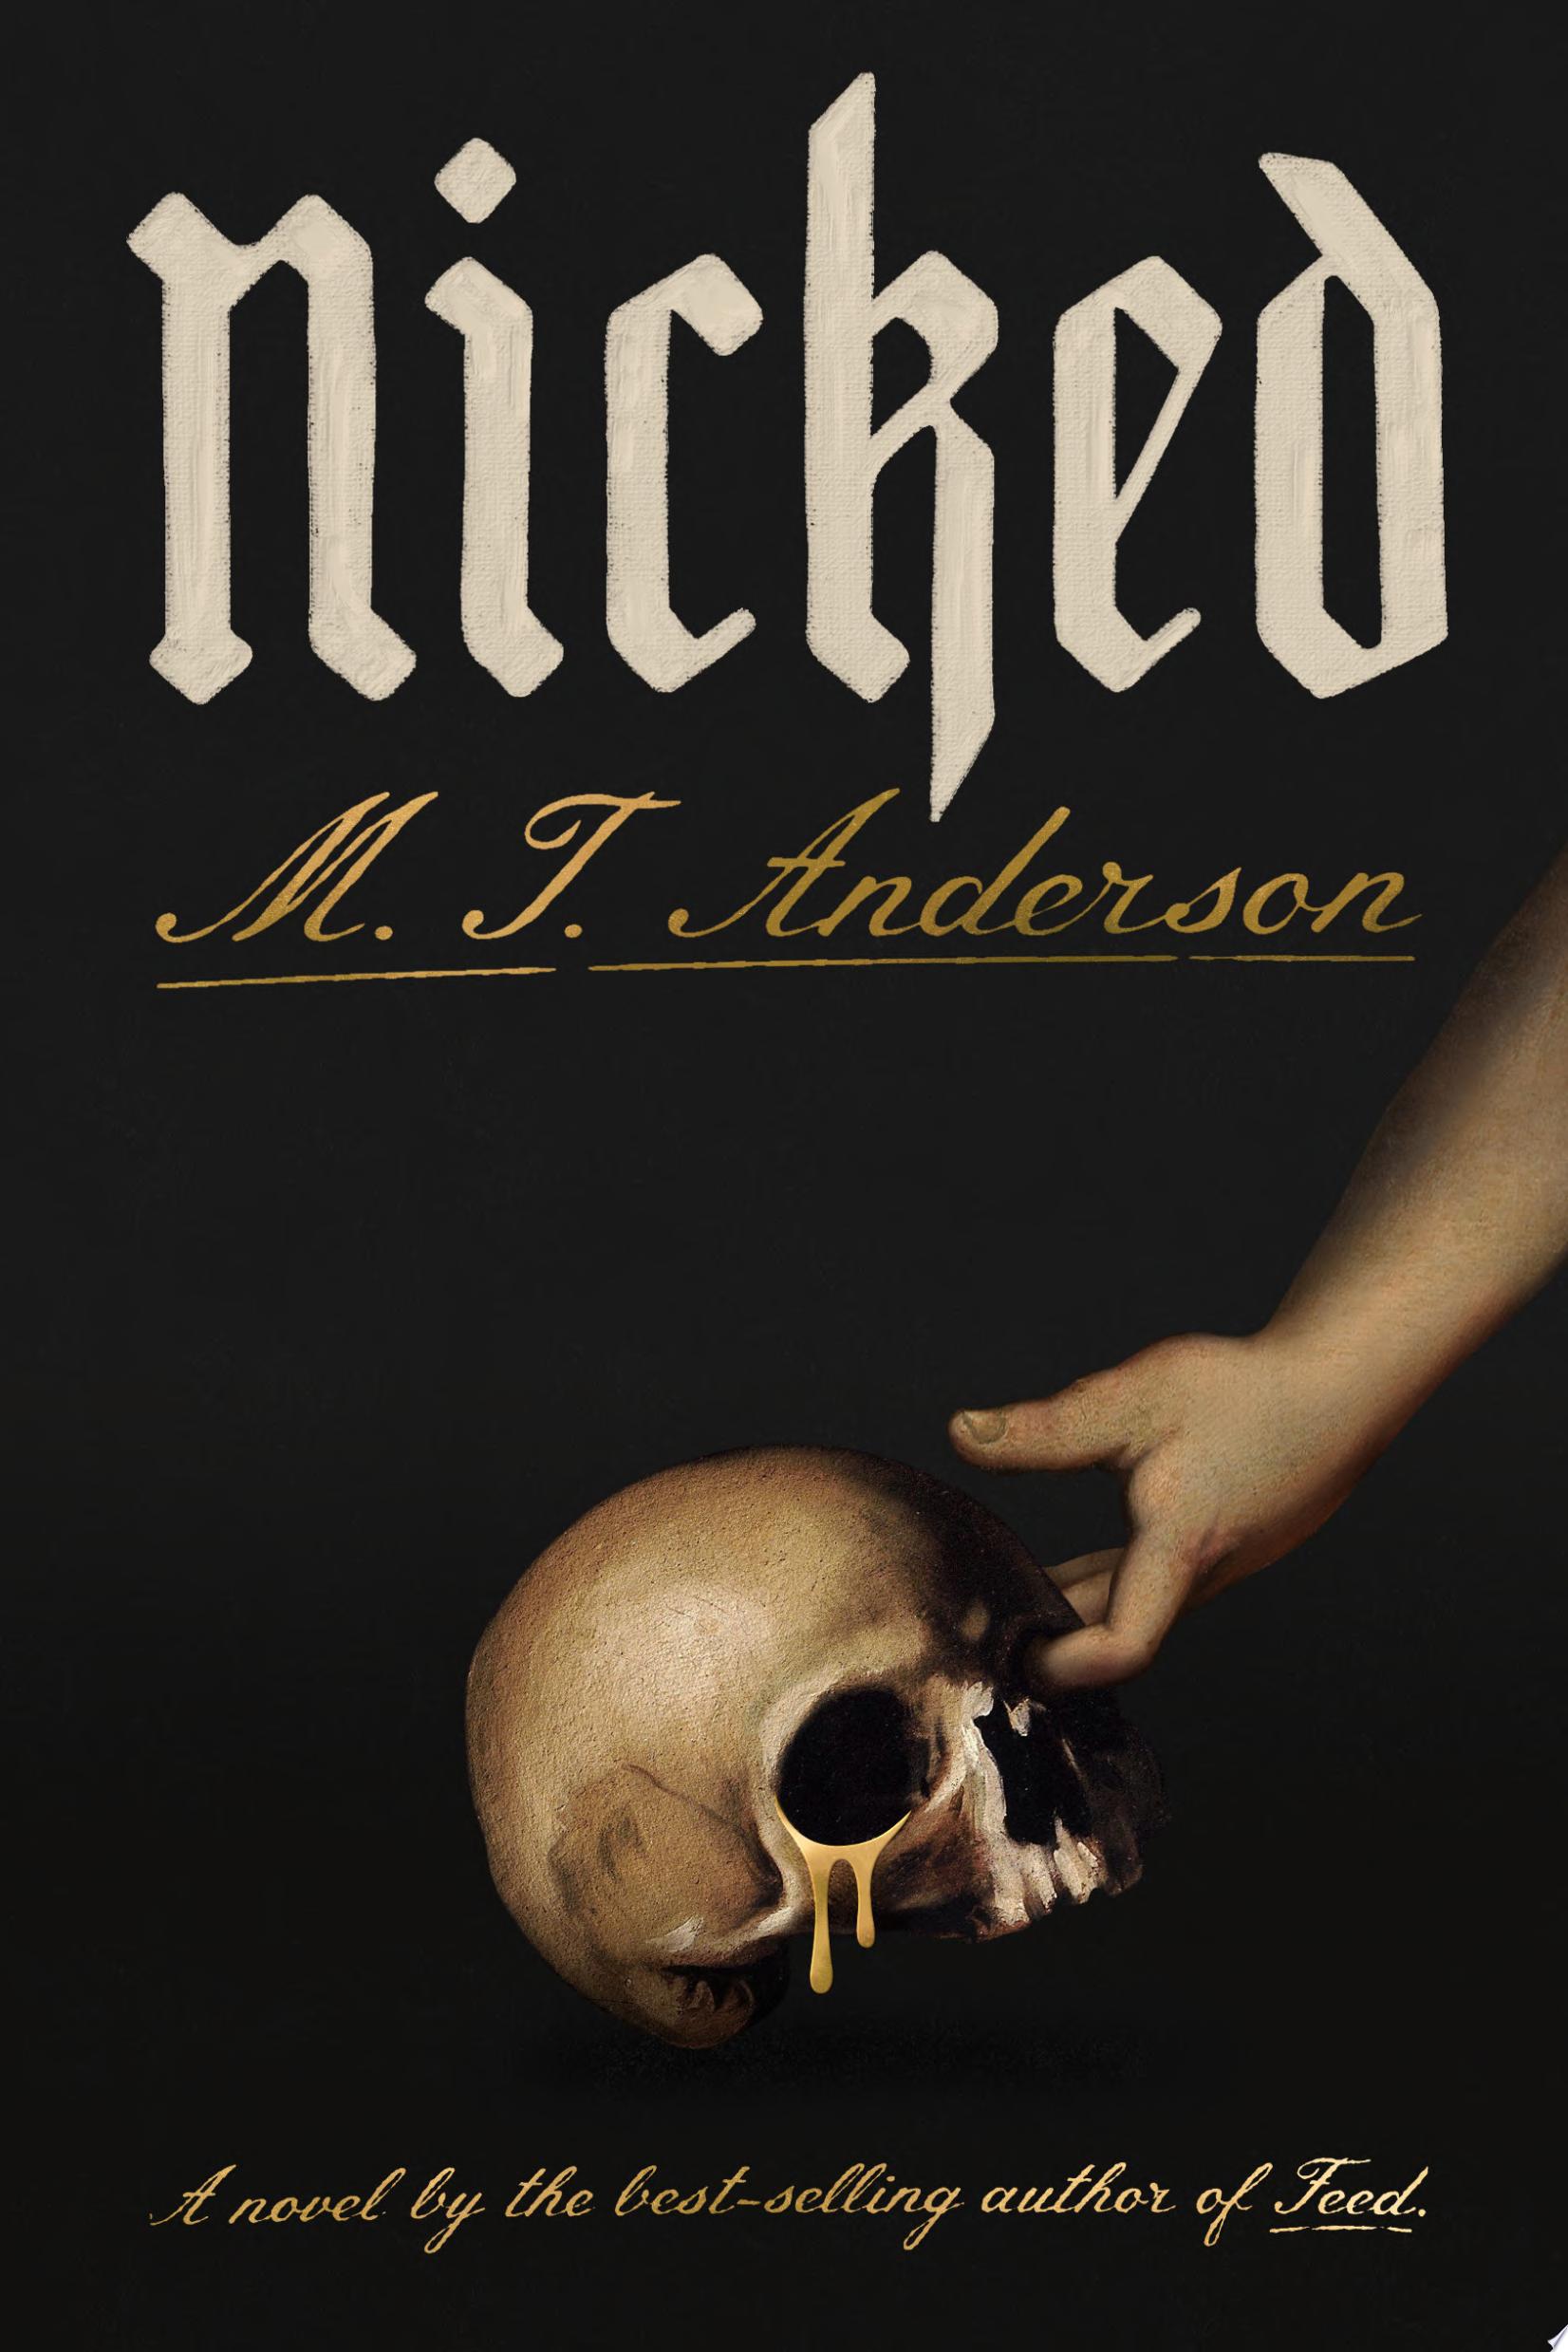 Image for "Nicked" by M. T. Anderson